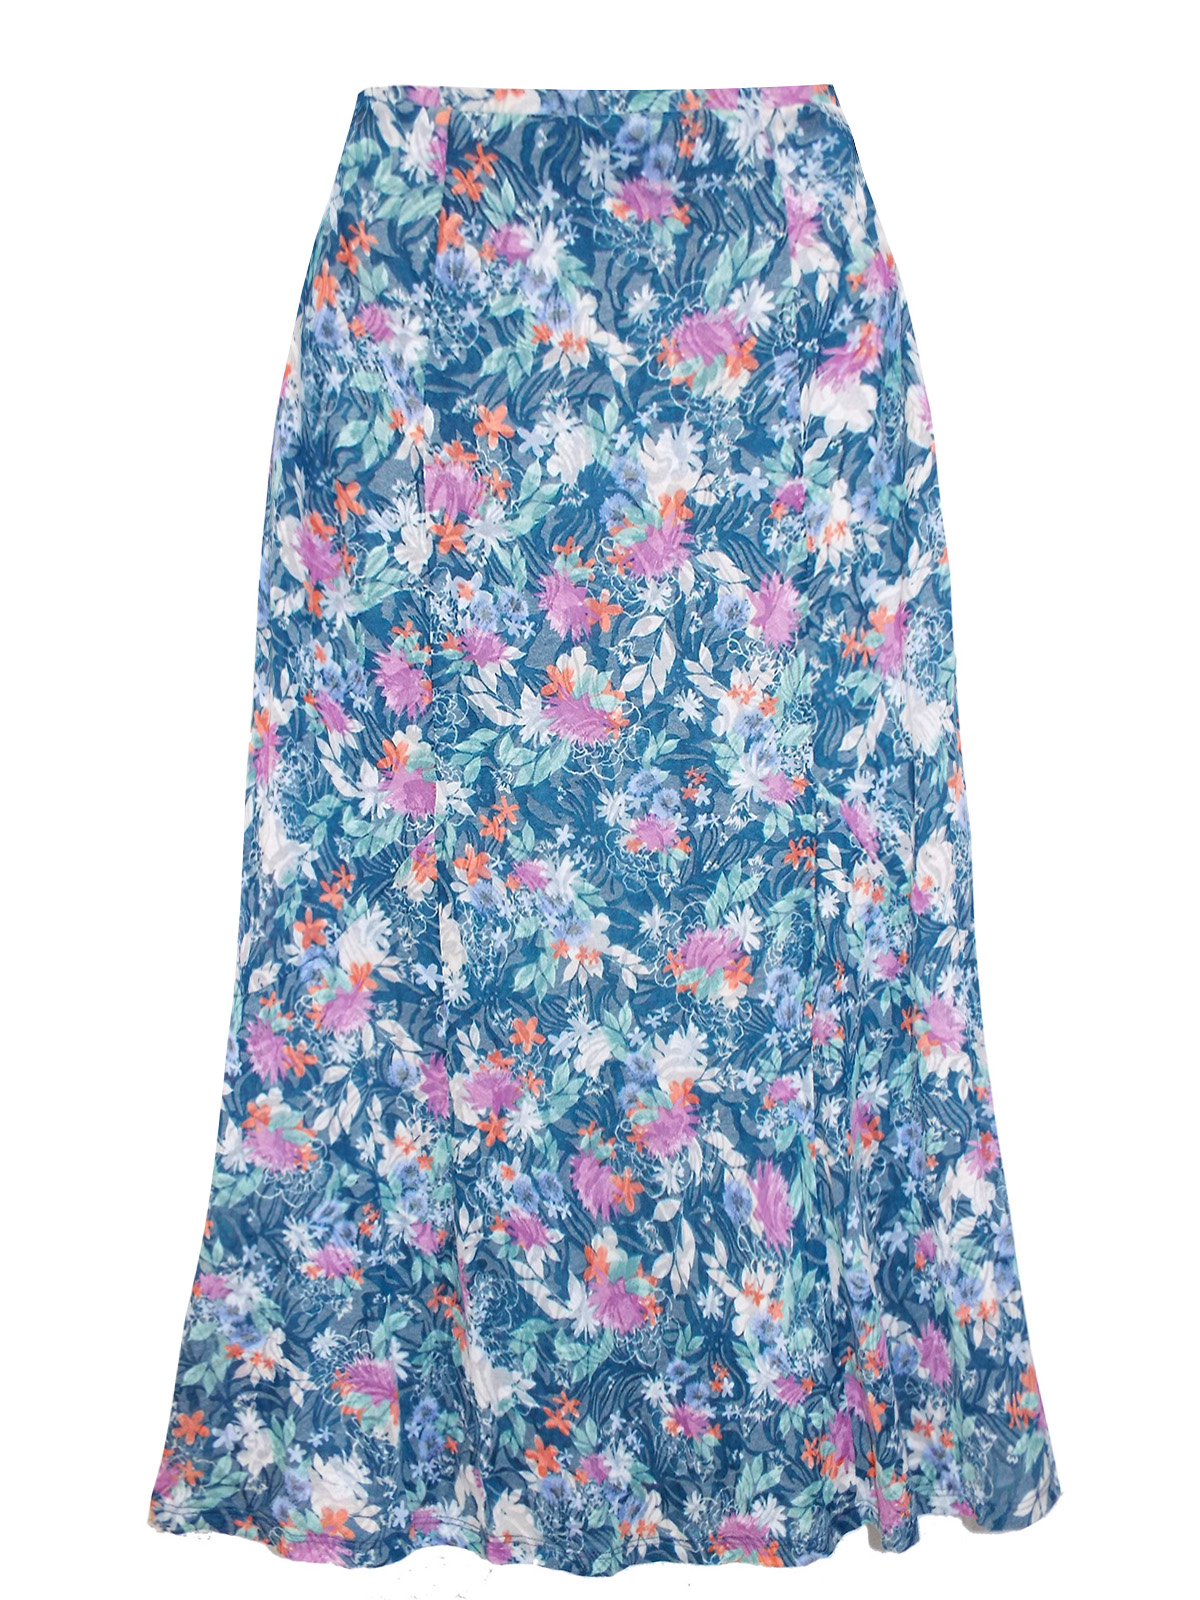 Cotton Traders BLUE Printed Burn Out Midi Skirt - Size 10 to 26